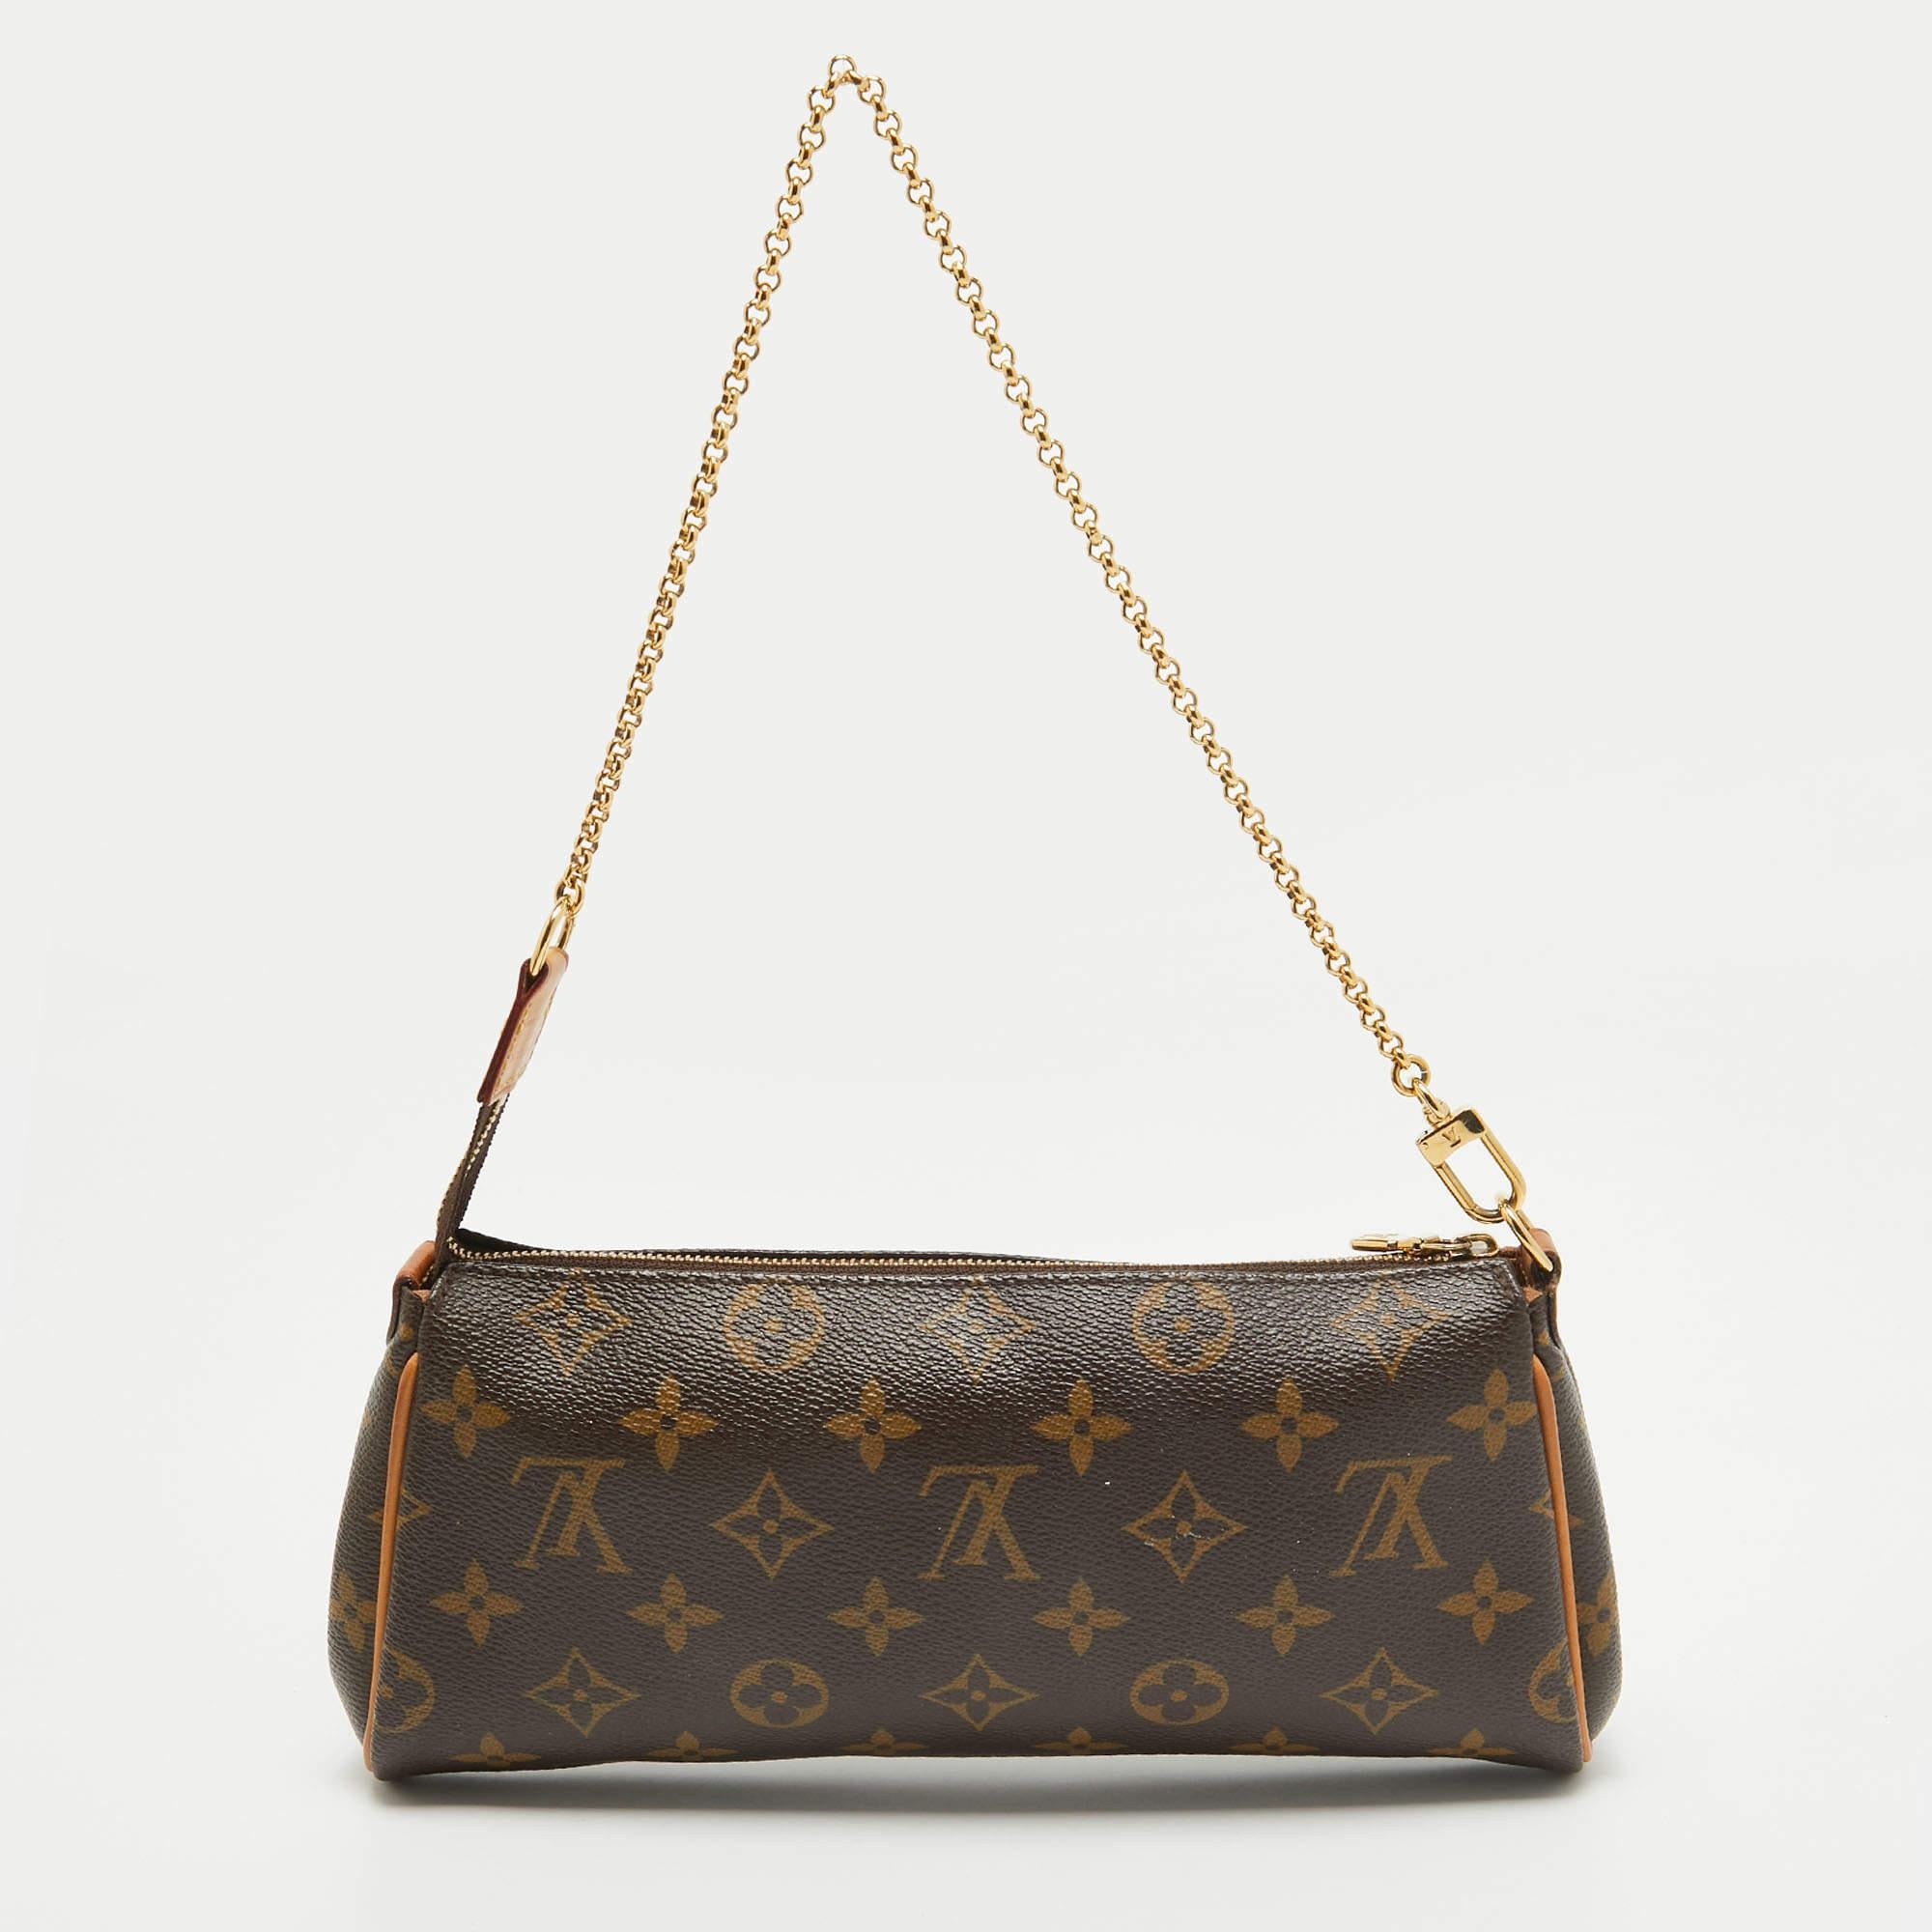 Crafted from Monogram canvas, this Eva Pochette bag is an adored creation by Louis Vuitton. The bag features a well-sized canvas interior that is secured by a gold-tone zipper. It comes with a chain and a leather strap.

Includes: Detachable Strap